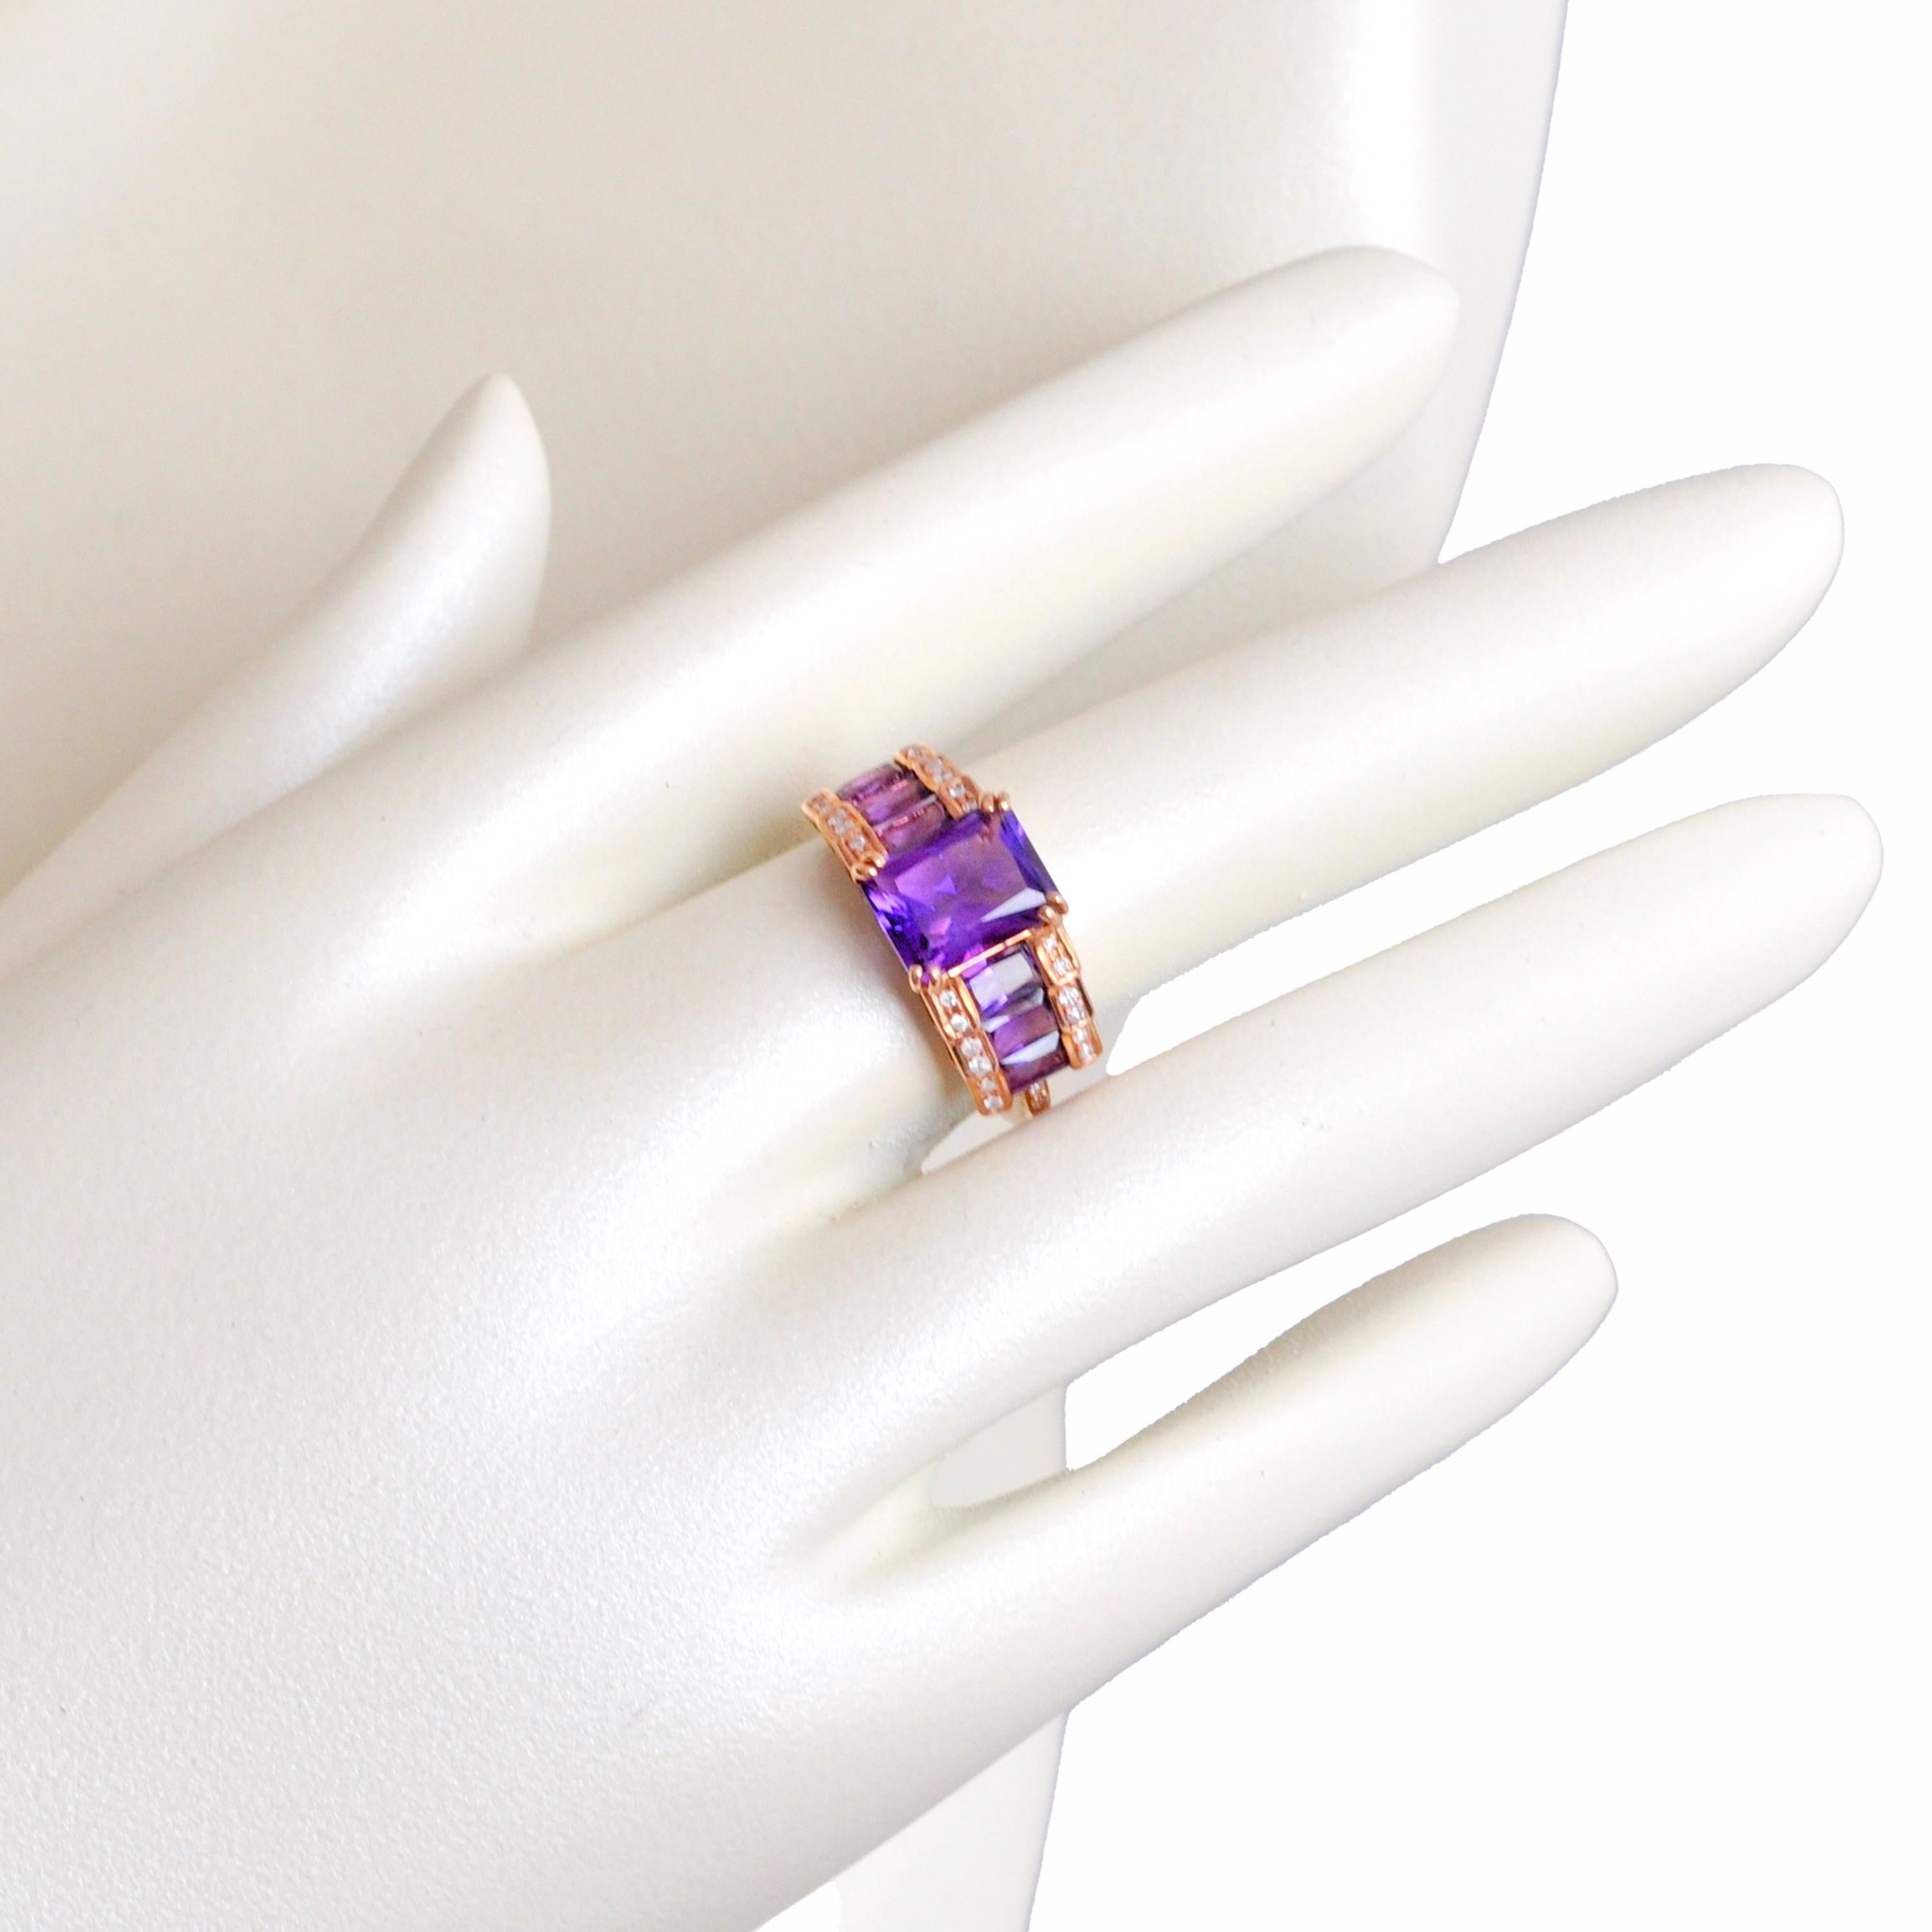 14 karat rose gold amethyst steps designer ring

This beautiful Amethyst ring is a radiant piece crafted to captivate the senses.

At its heart lies an octagon-cut amethyst stone, exuding a deep and enchanting purple hue that catches the light with